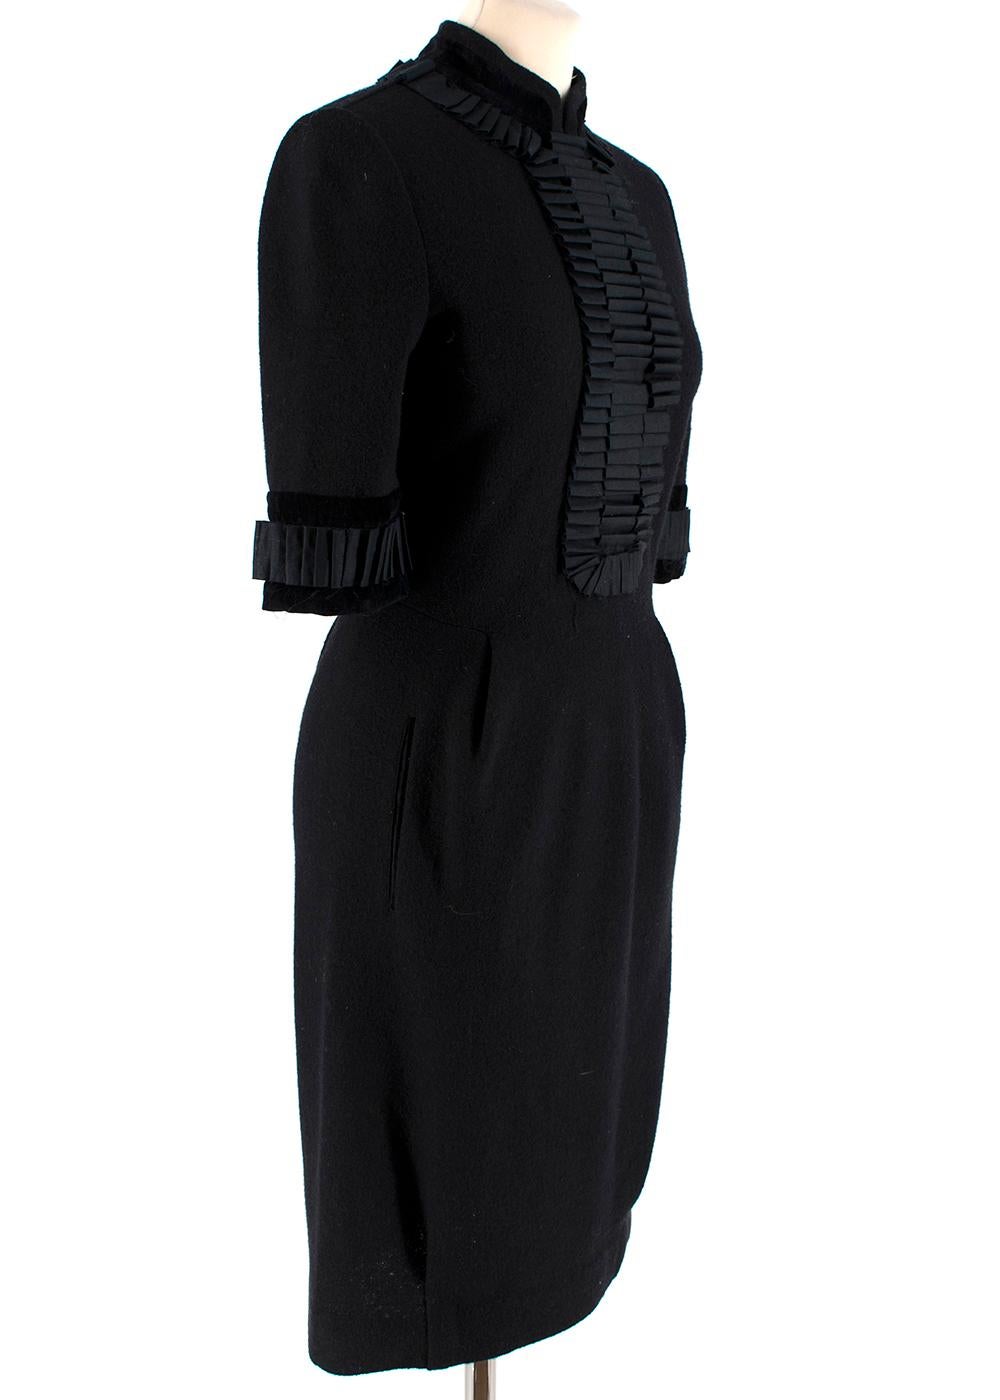 Yves Saint Laurent Wool Ruffle Trim High Neck Dress

- High neck ruffle trim design 
- Silk ruffle detailing 
- Velvet effect cuff and neck trims
- Midi length sleeves and hem 
- Front darts
- Front welt pockets 
- Concealed back zip and eyelet